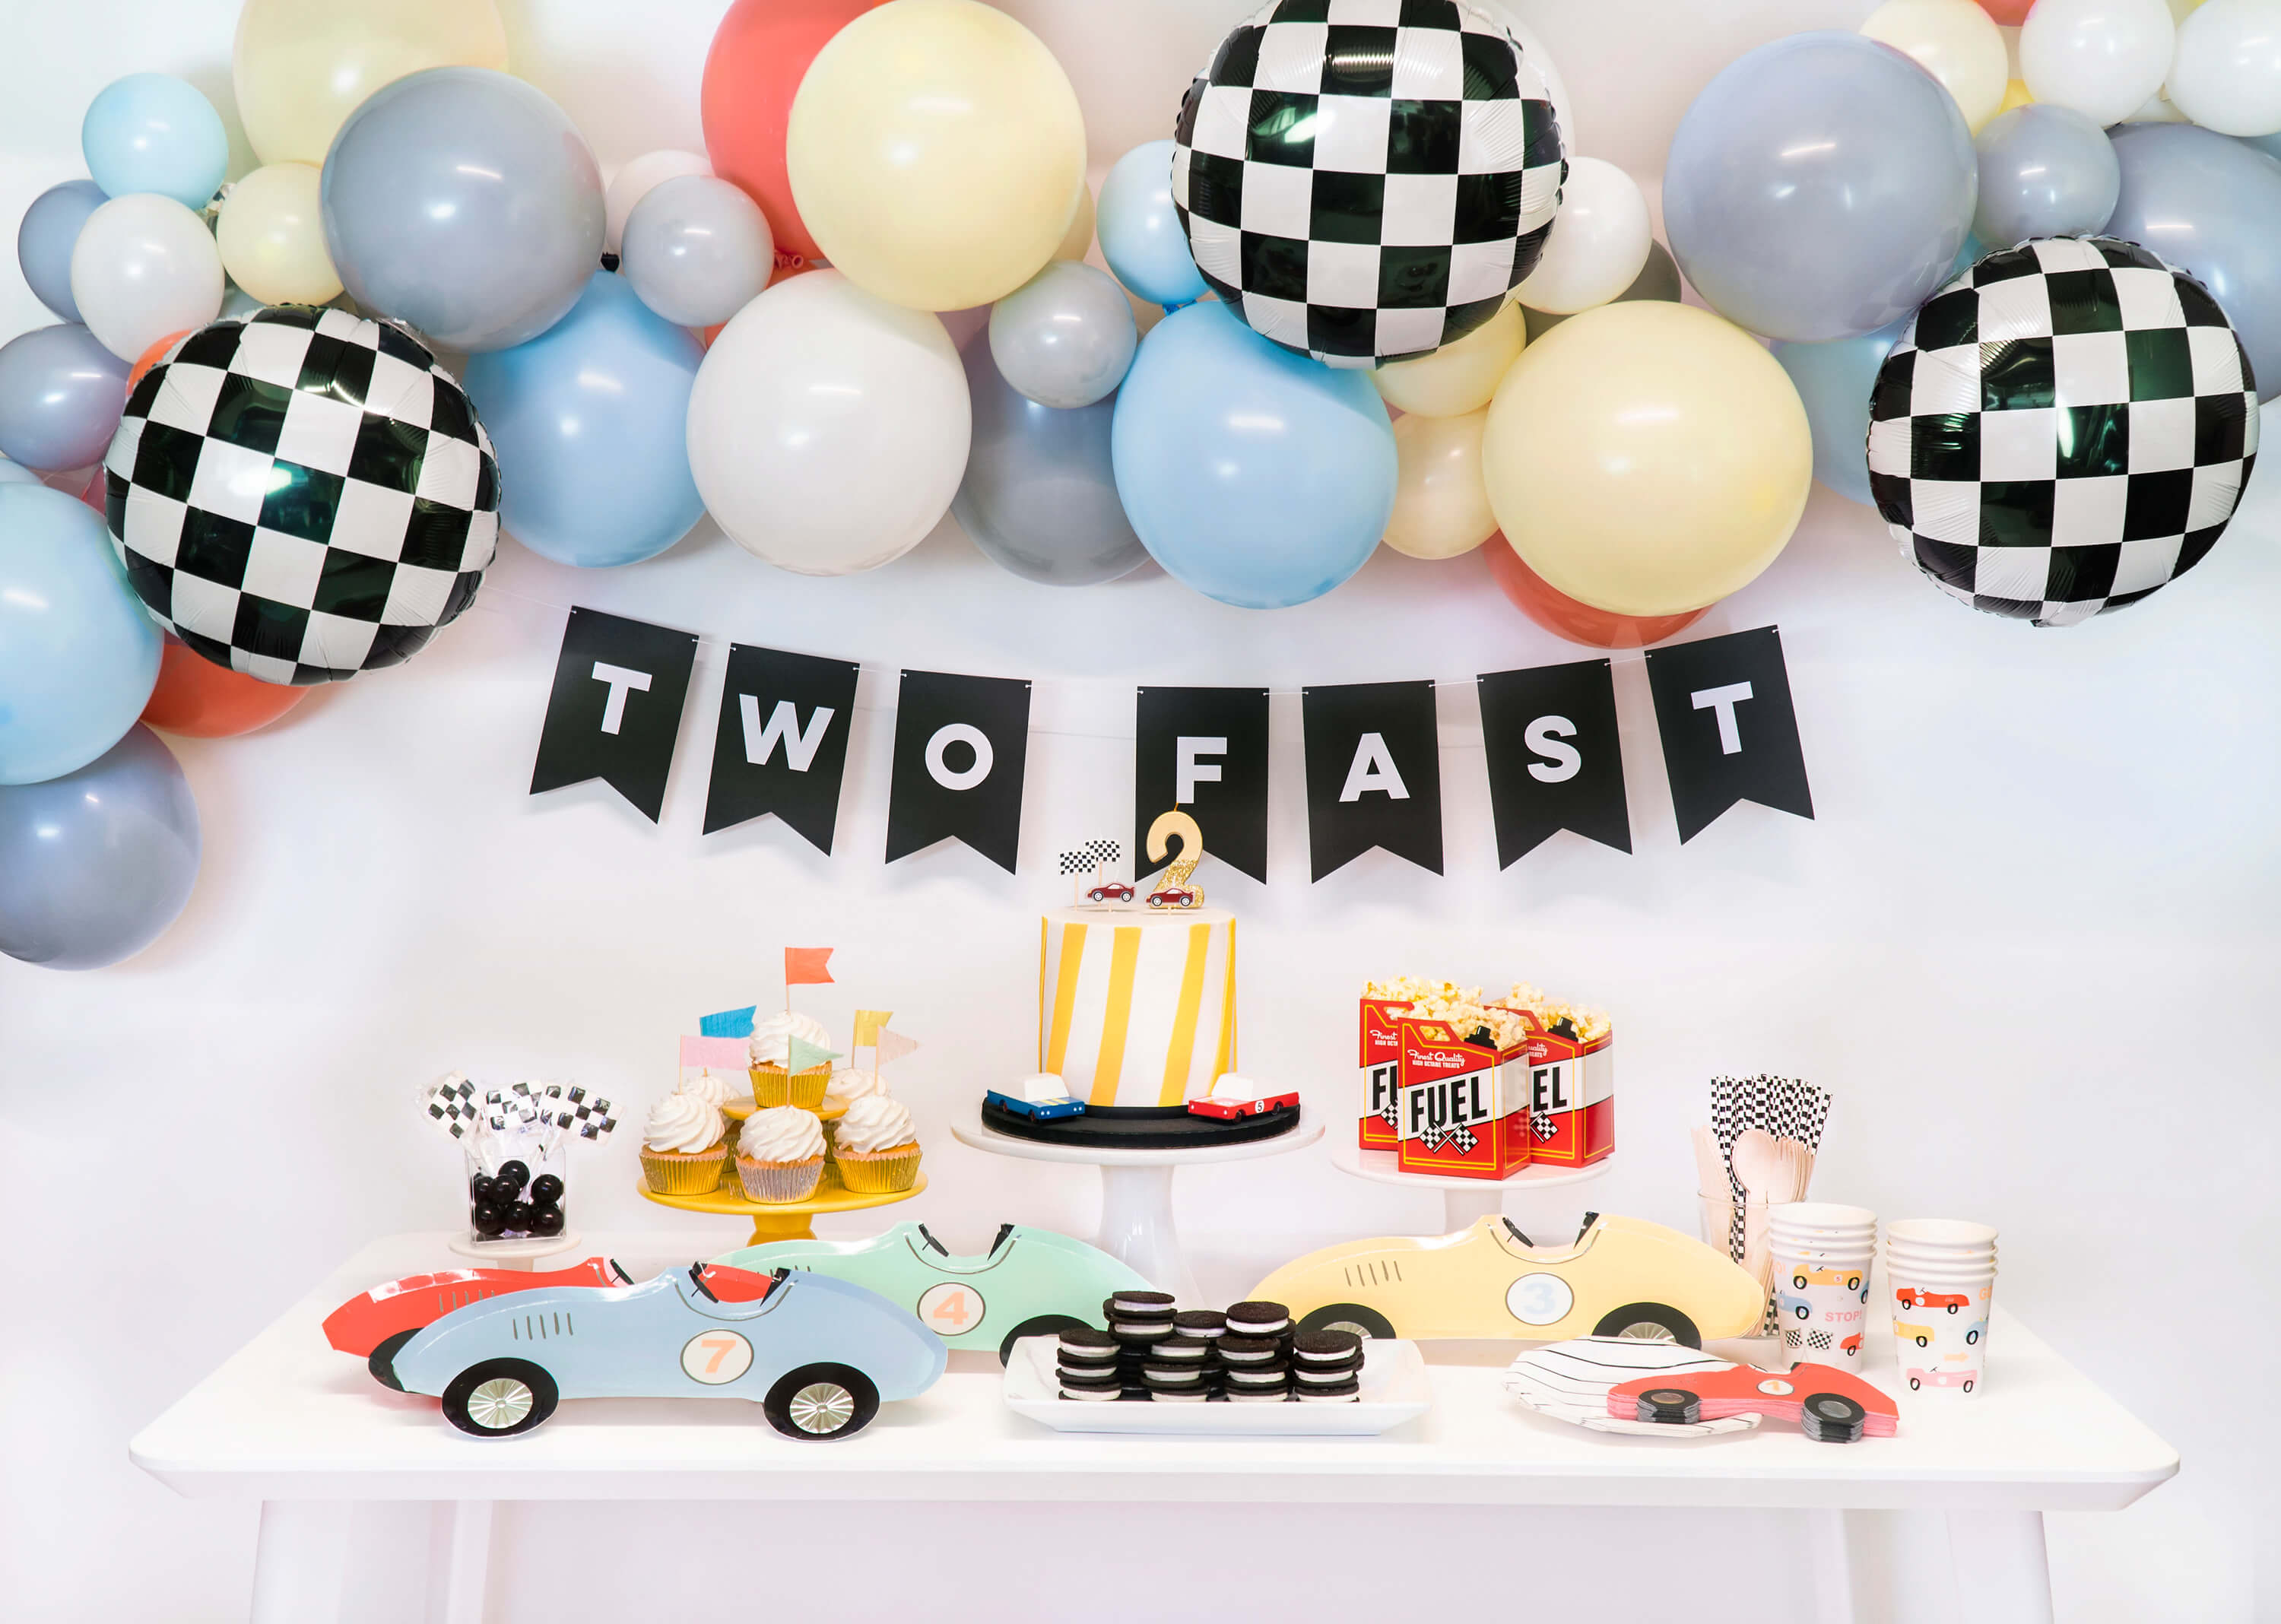 Pin by Rosa Gutierrez on Lugares que visitar | 1st birthday party  decorations, Birthday party decorations, Simple birthday decorations